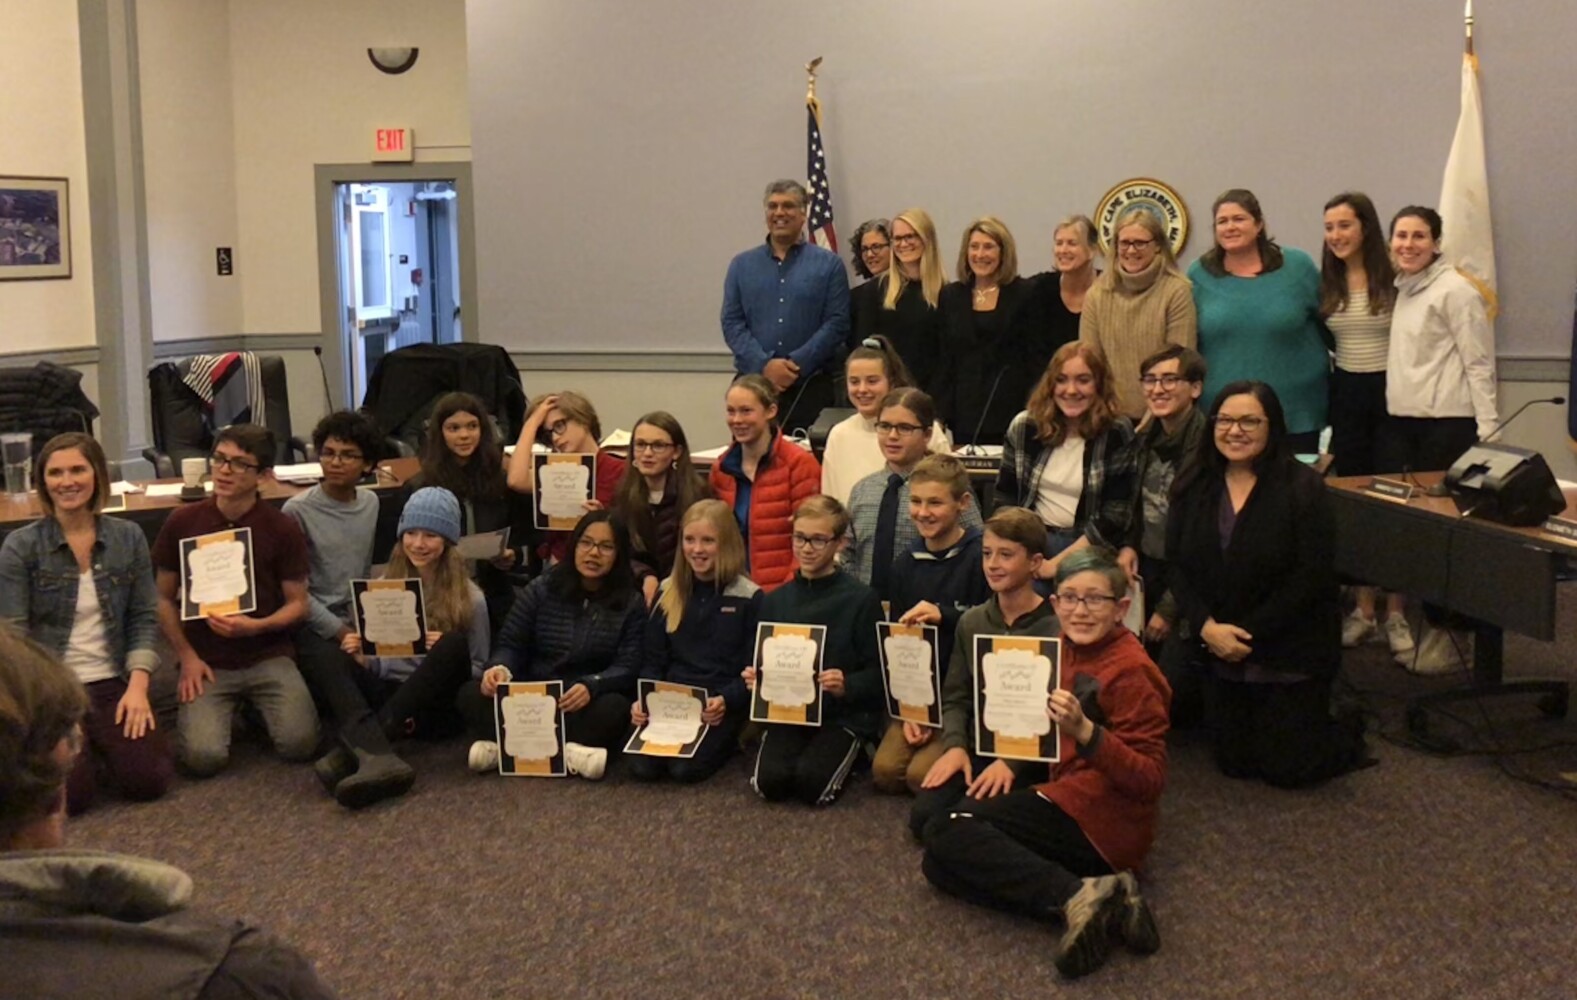 Cape Elizabeth Middle School and High School students and the school board celebrate the students' acceptance into this year's honors festivals.